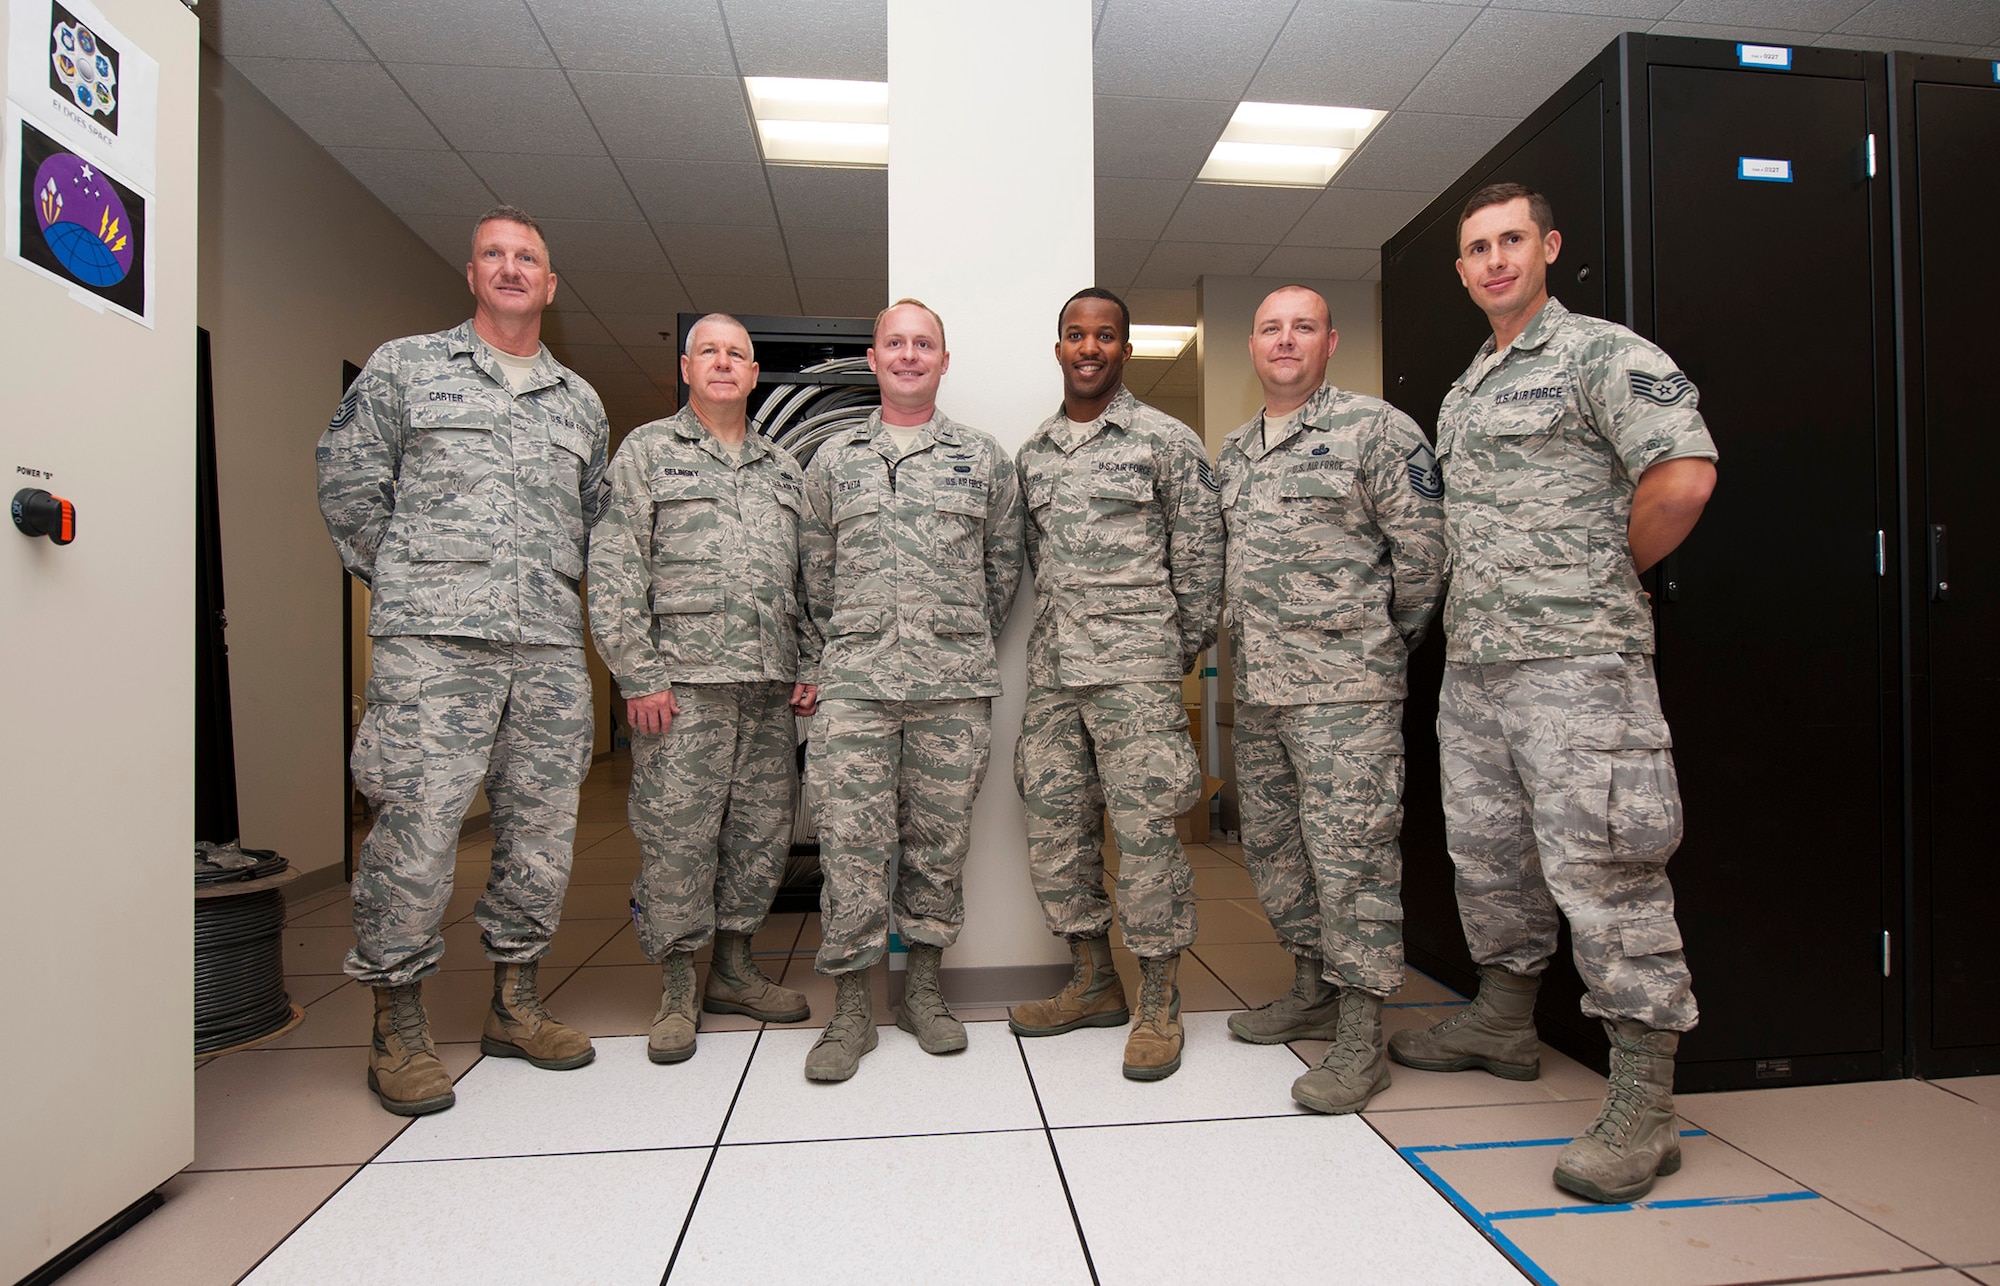 The Air National Guard Engineering Installation team at Vandenberg is headed up by Tech. Sgt. Brian Carter, 130th EIS, Communication Team Lead; Master Sgt. Michael Selinsky, 270th EIS, Range Simulation Center Team Lead; 1st Lt. Vincente De Vita, 130th EIS, ANG OIC; Tech. Sgt Aamir Cooper, 270th EIS, Telemetry Analog Equipment Room Team Lead; Master Sgt. Kyle Wood, 130th EIS, ANG NCOIC/Team Chief; and Staff Sgt. Chris Cox, 217th EIS, Range Data Control Center Team Lead. (U.S. Air Force photo by Michael Peterson/released)